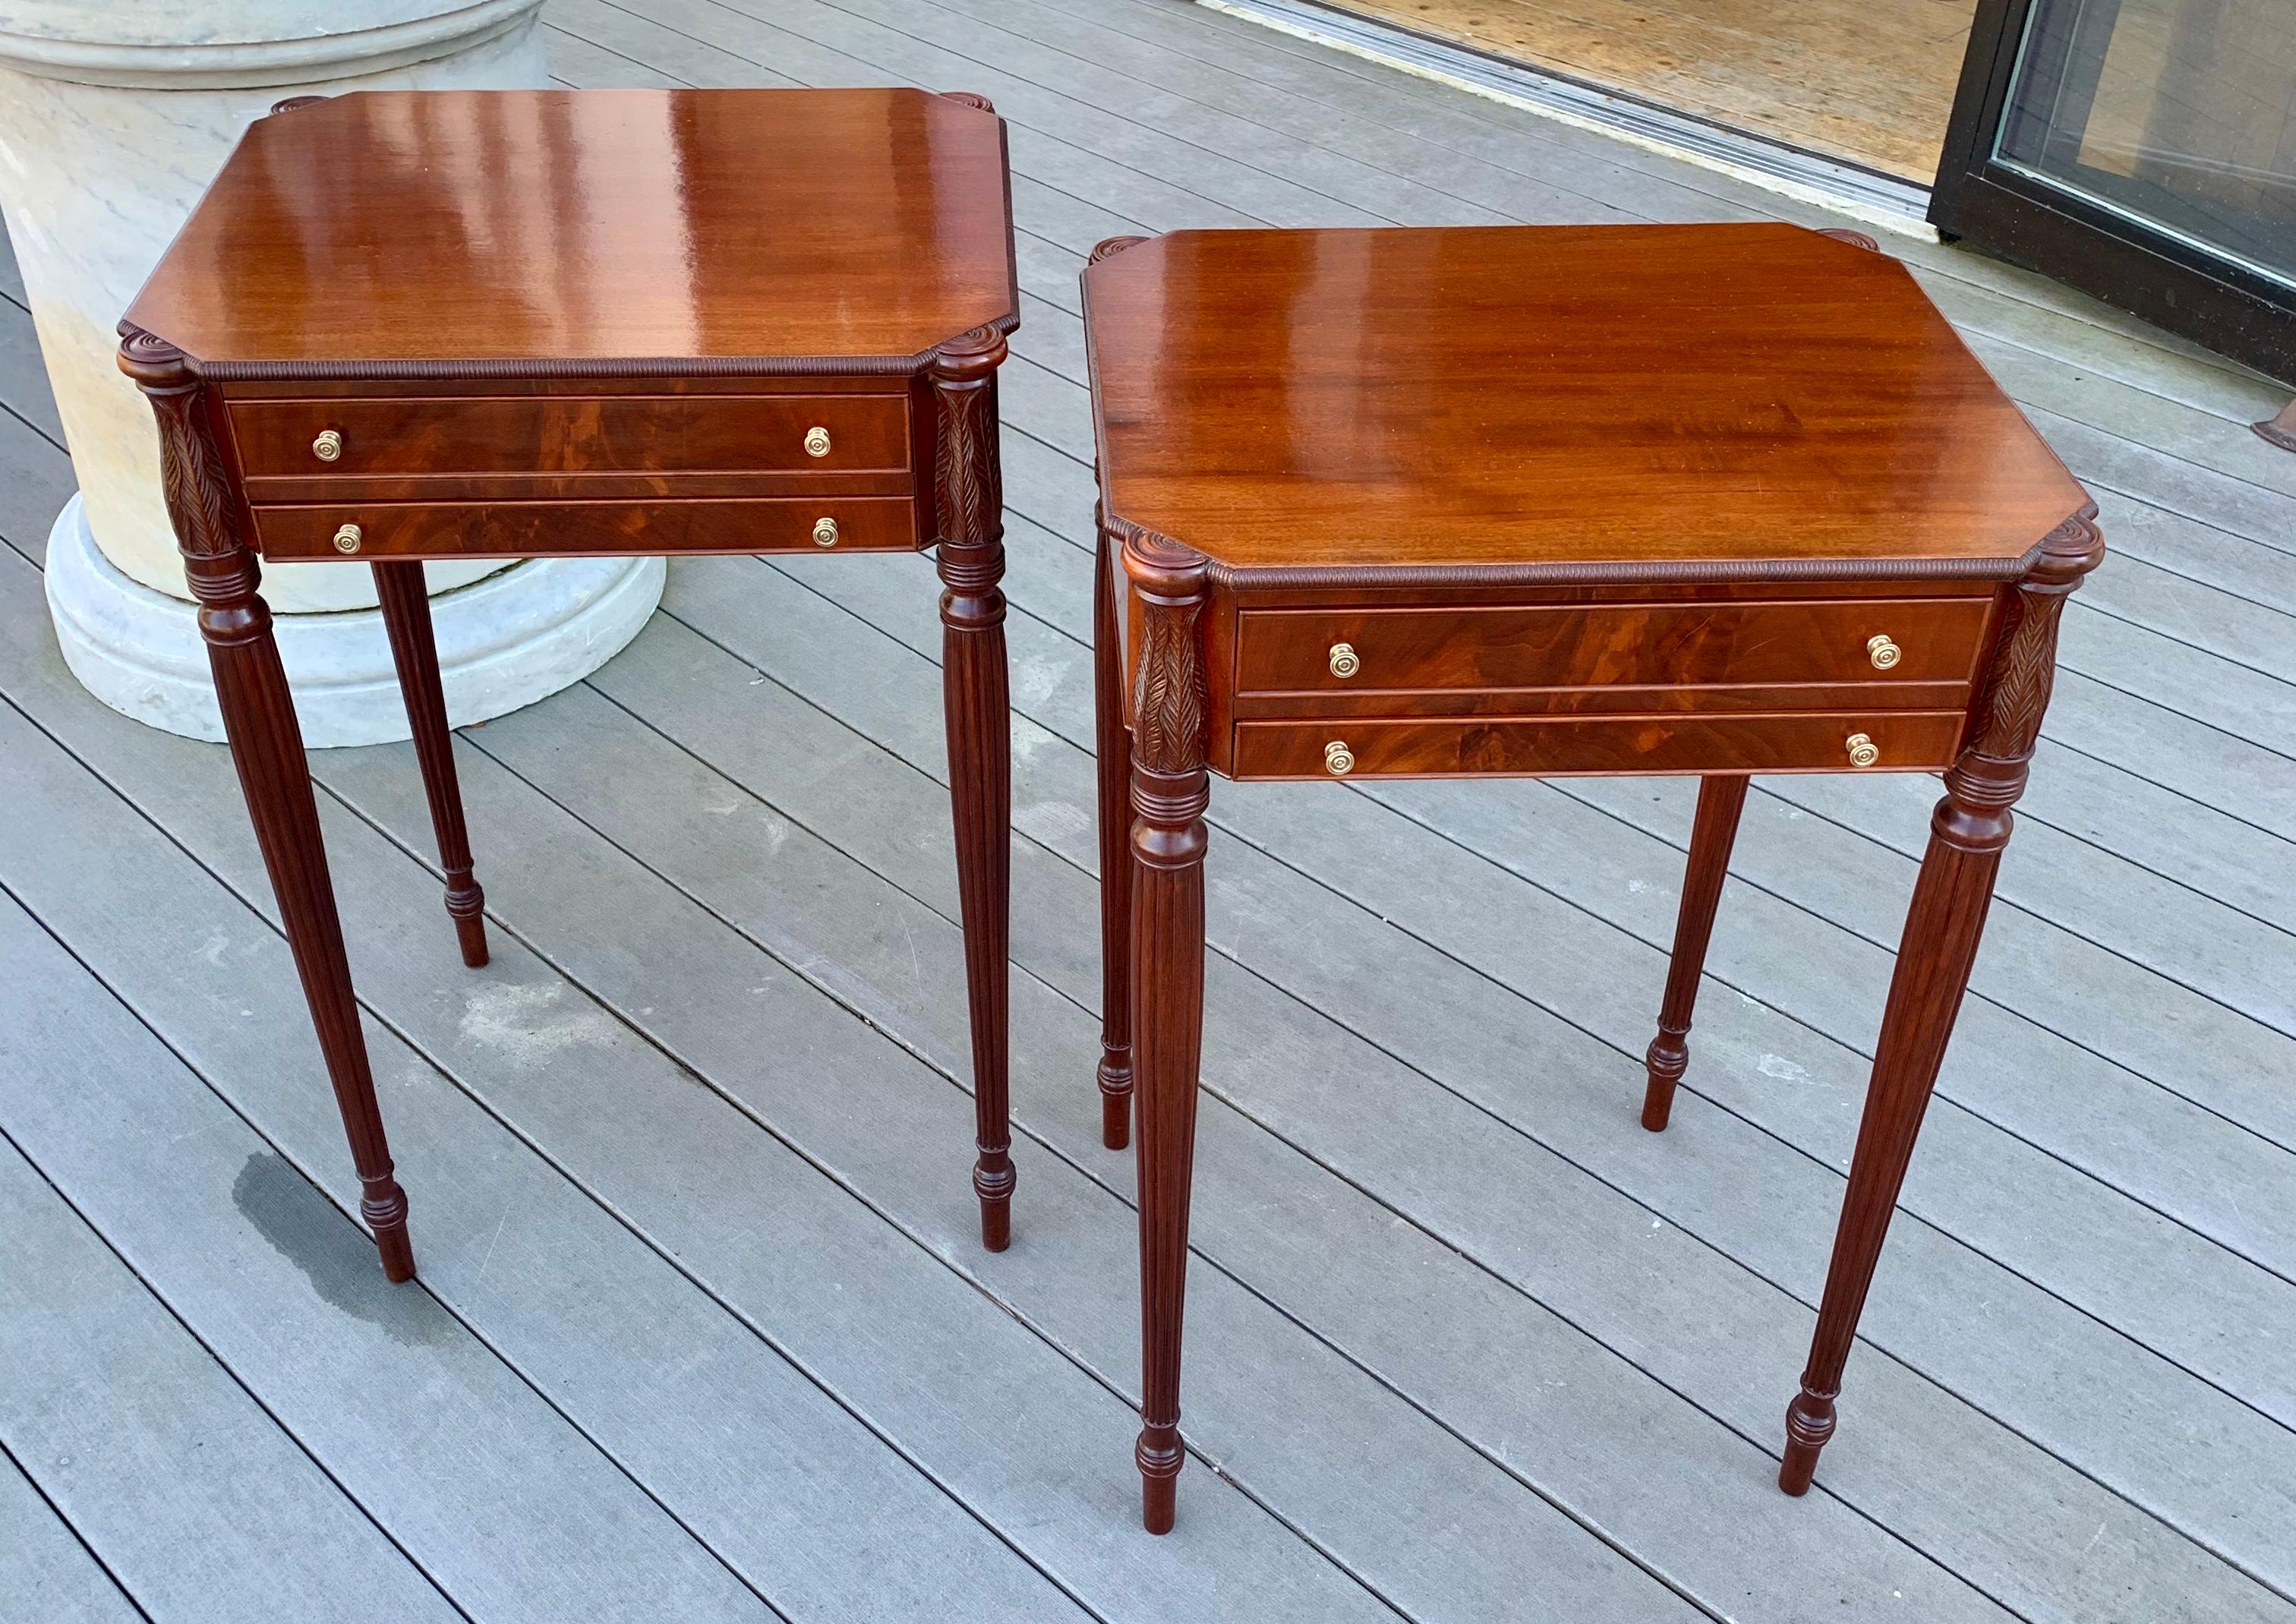 Pair of custom made federal style end or work tables in the style of master Samuel McIntire. Mahogany and hand carved with tapered and reeded legs, acanthus carved top elements and two fitted drawers.